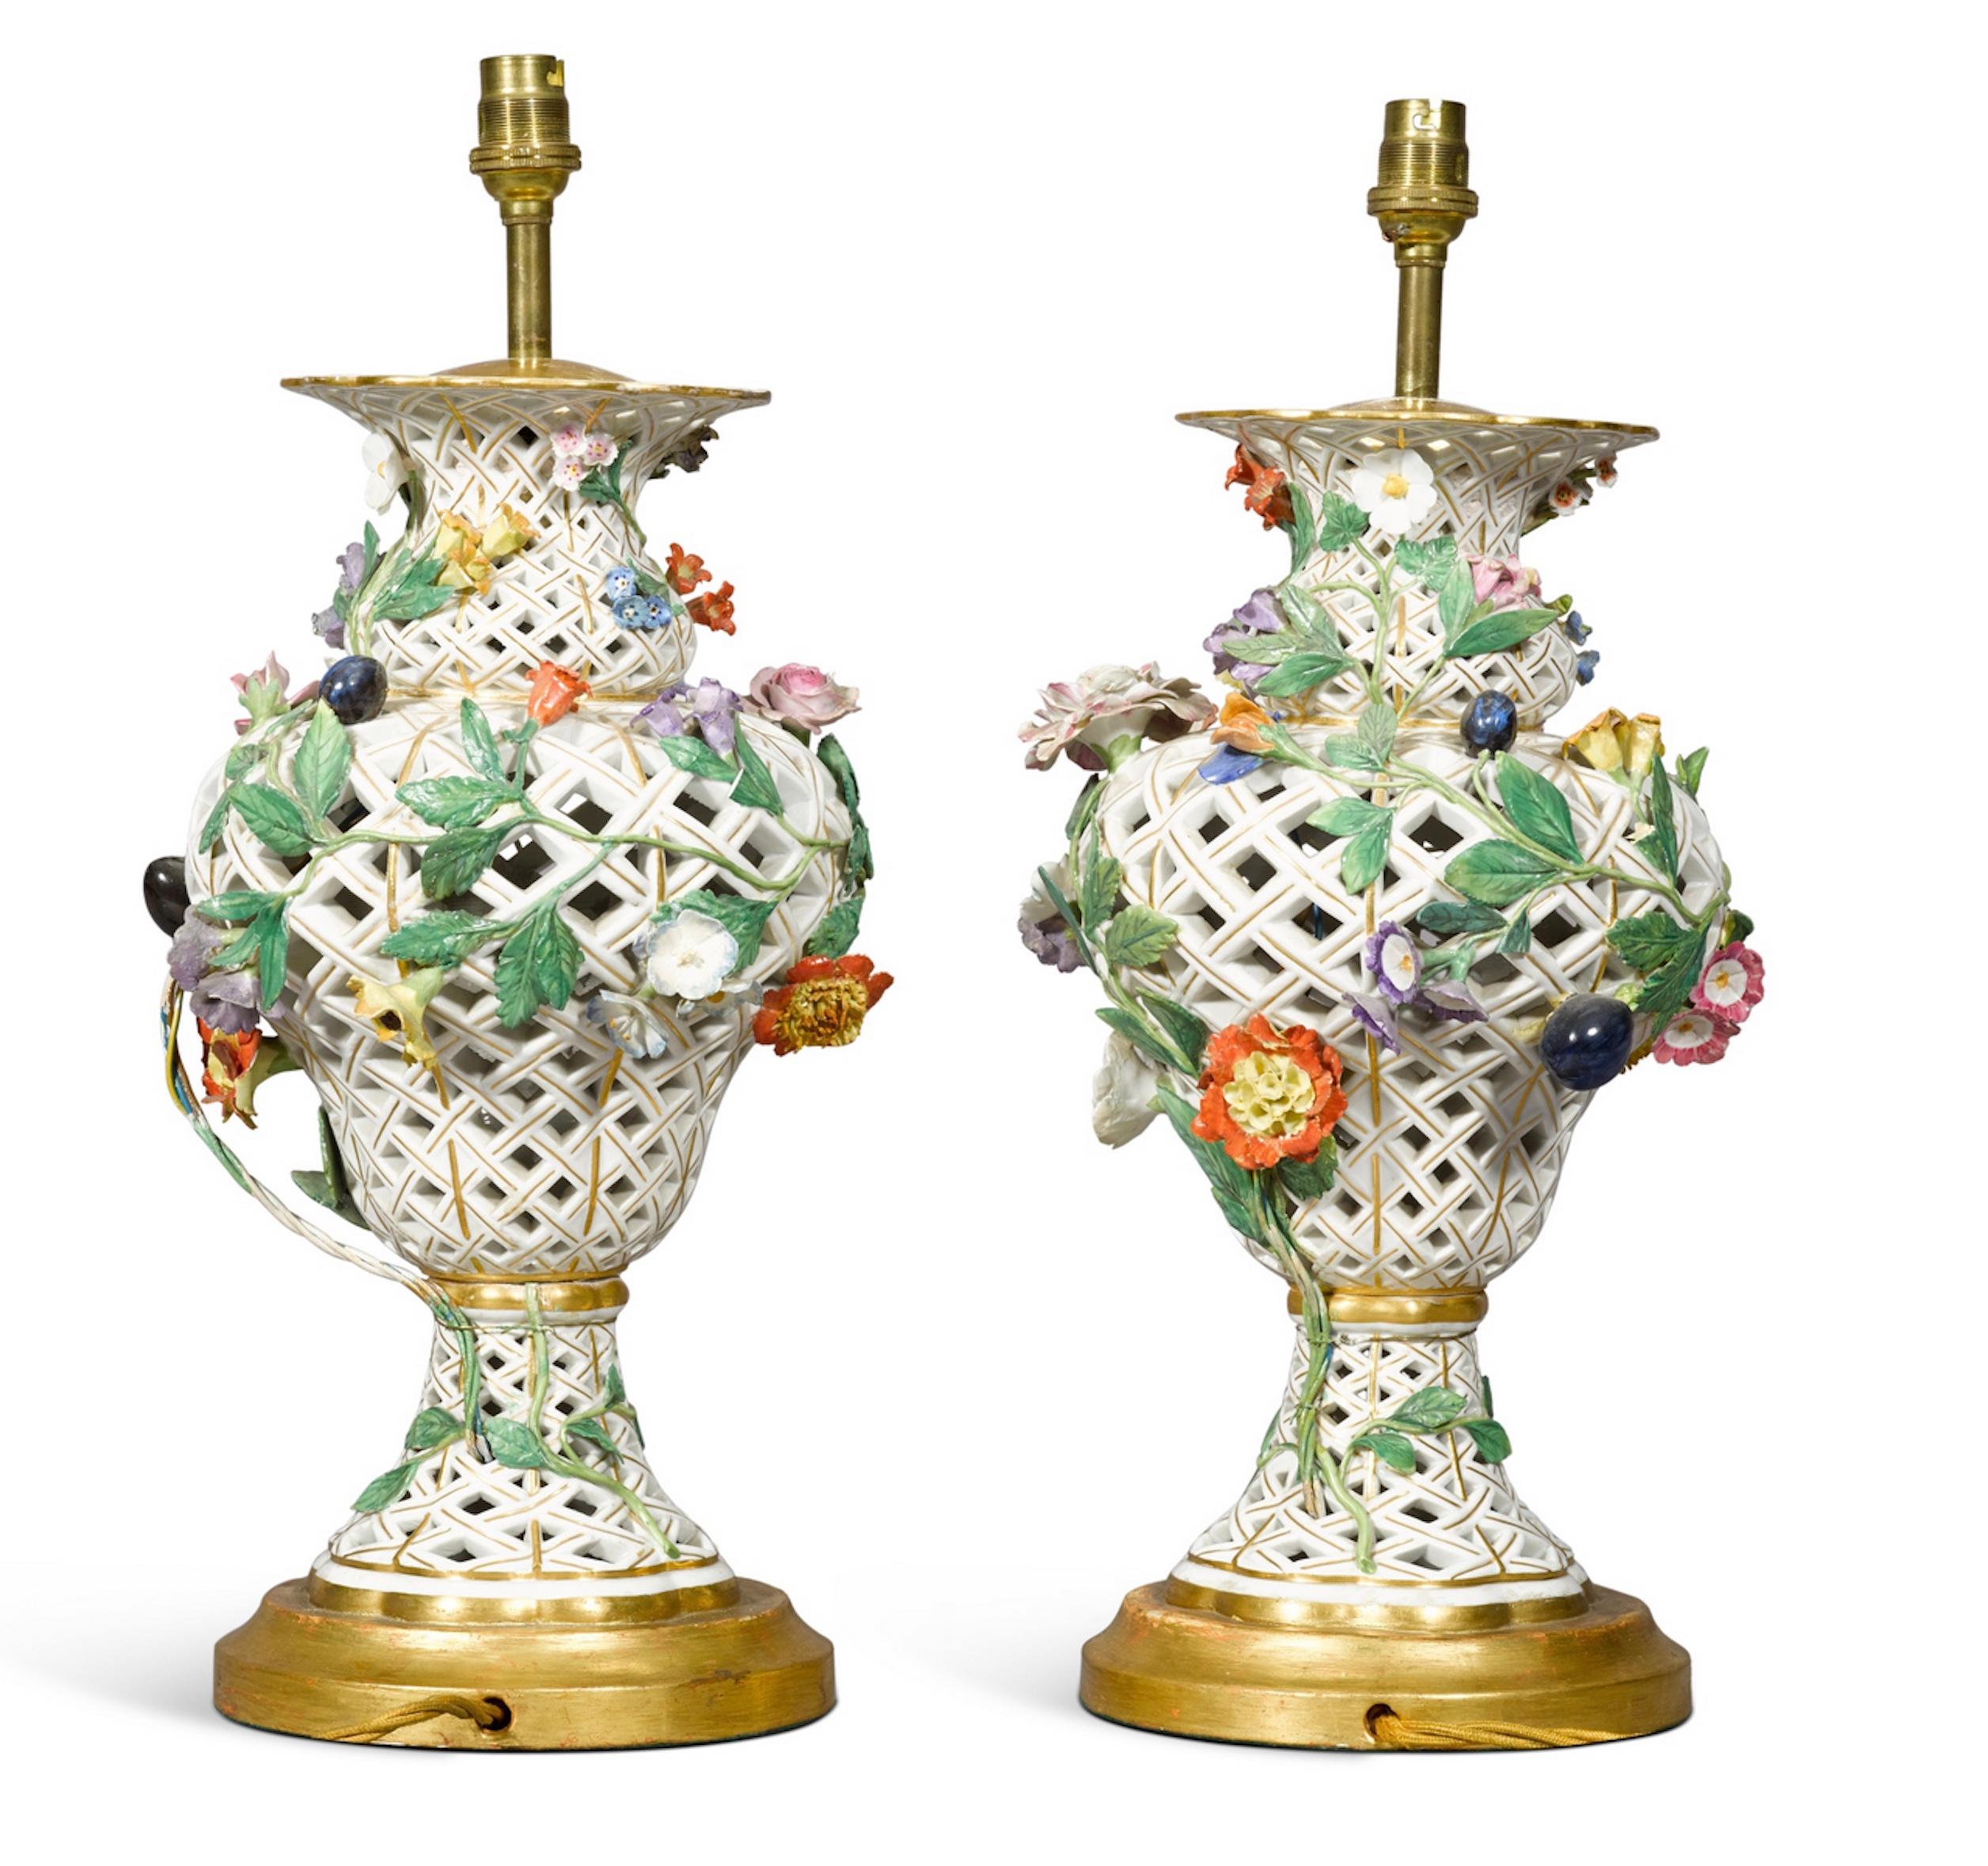 A rare pair of Continental porcelain table lamps, probably Samson in the Meissen style, 19th century of baluster form, pierced with a trellis pattern and applied with fruits and flowers, now mounted as a lamp with a hand gilded turned